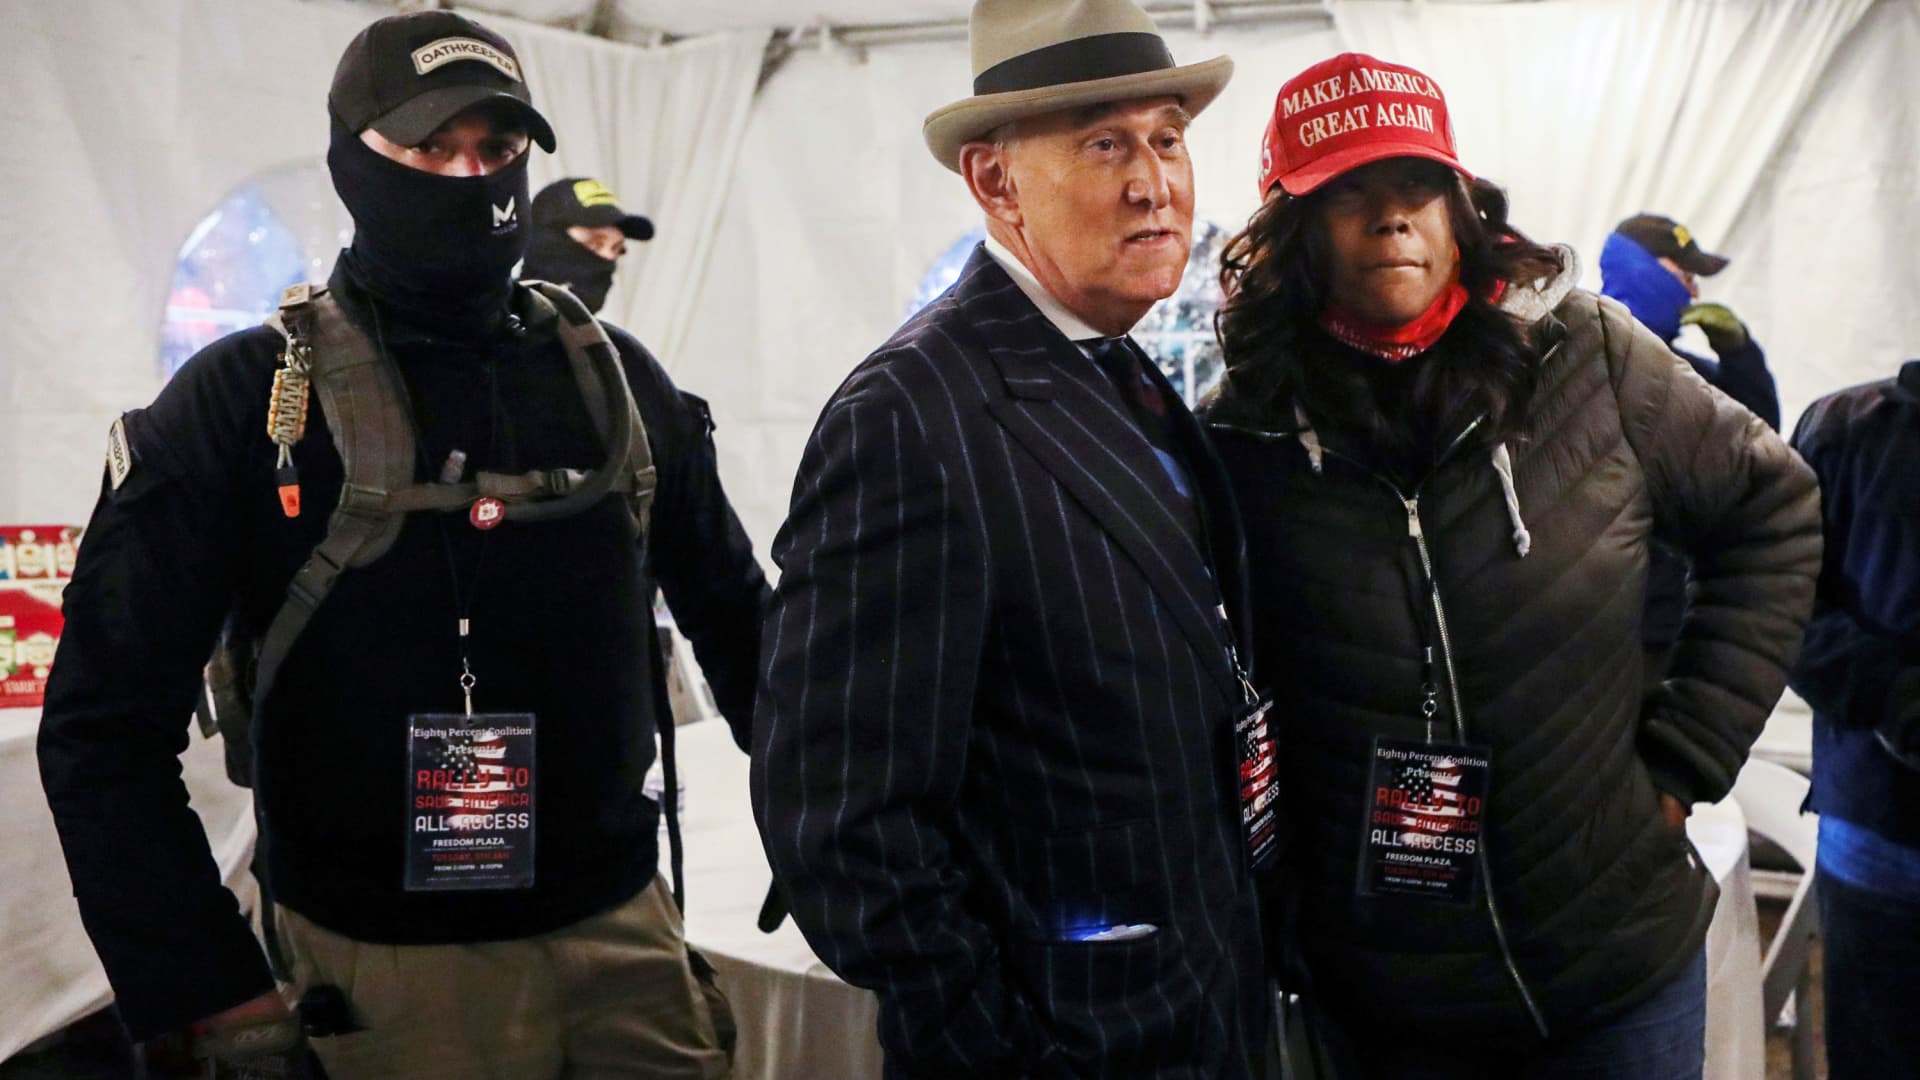 Members of the Oath Keepers provide security to Roger Stone at a rally the night before groups attacked the U.S. Capitol, in Washington, January 5, 2021.